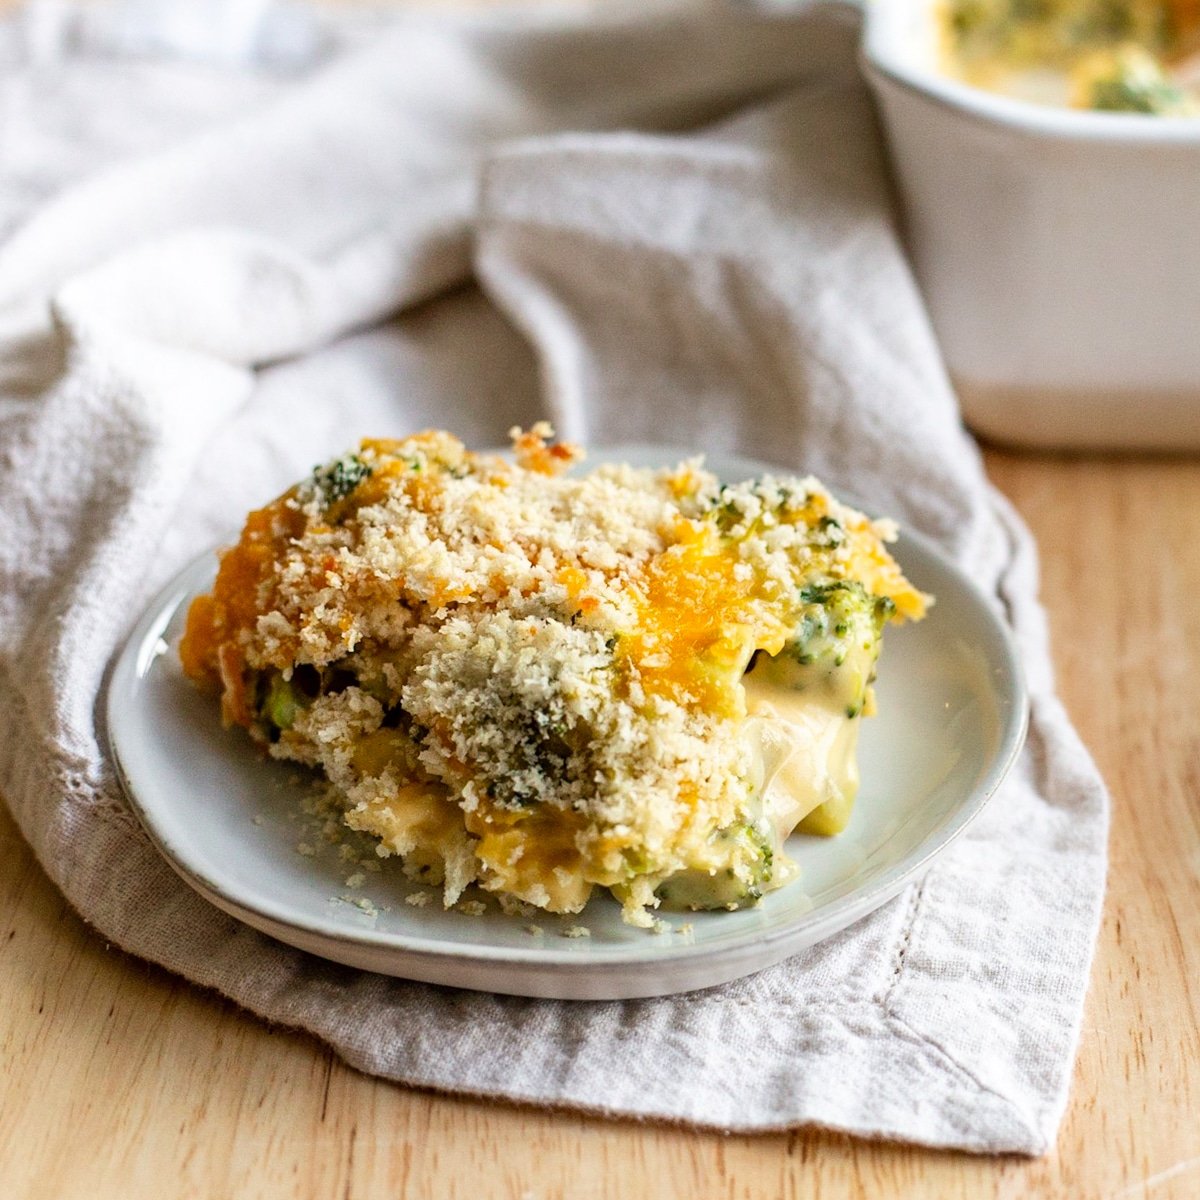 Plate of broccoli cheese casserole with panko topping.